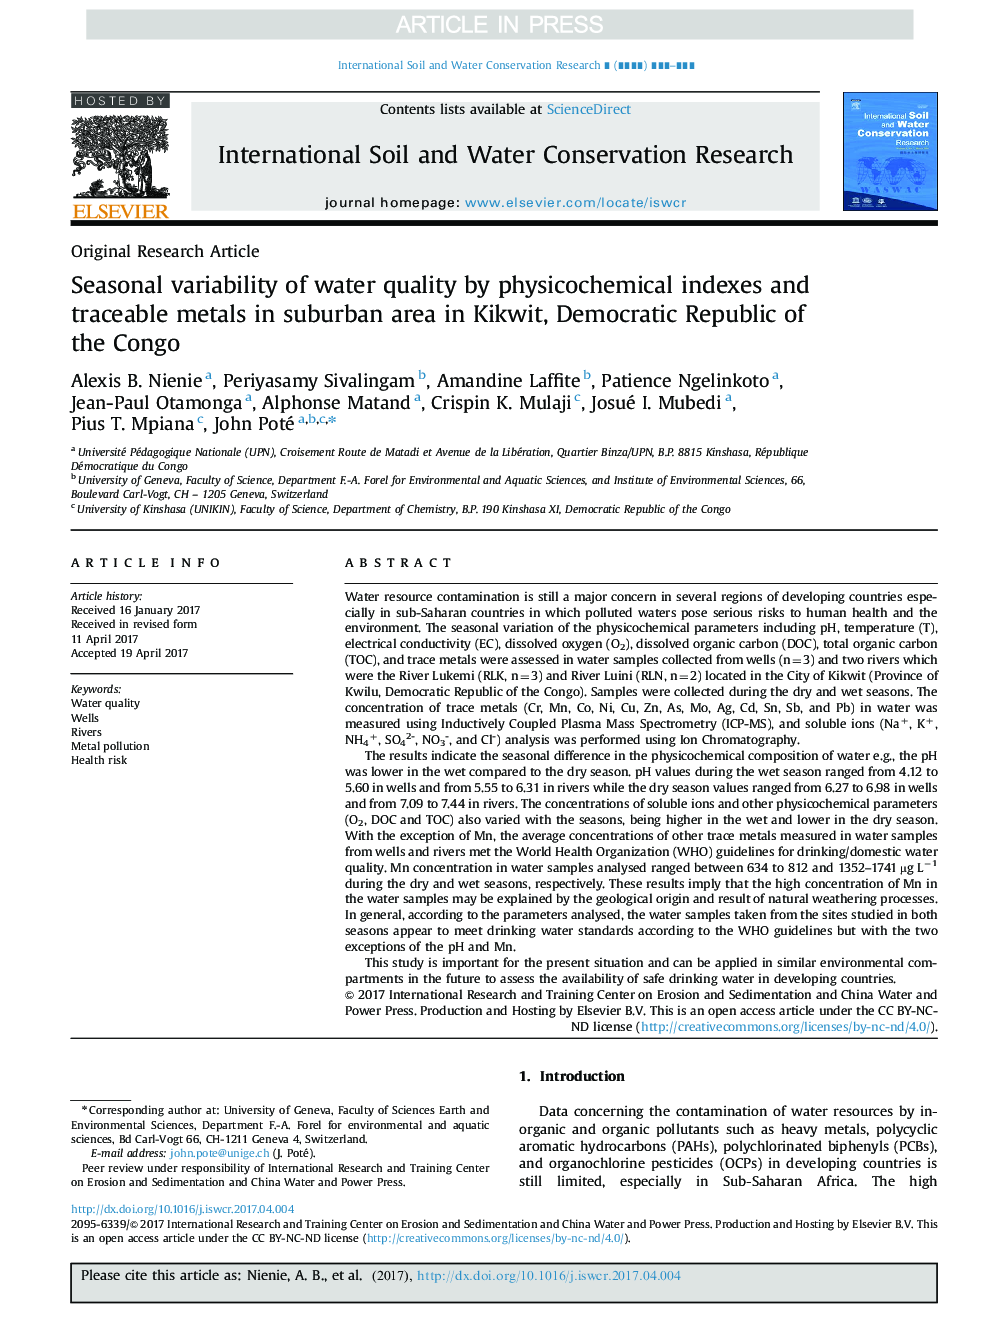 Seasonal variability of water quality by physicochemical indexes and traceable metals in suburban area in Kikwit, Democratic Republic of the Congo